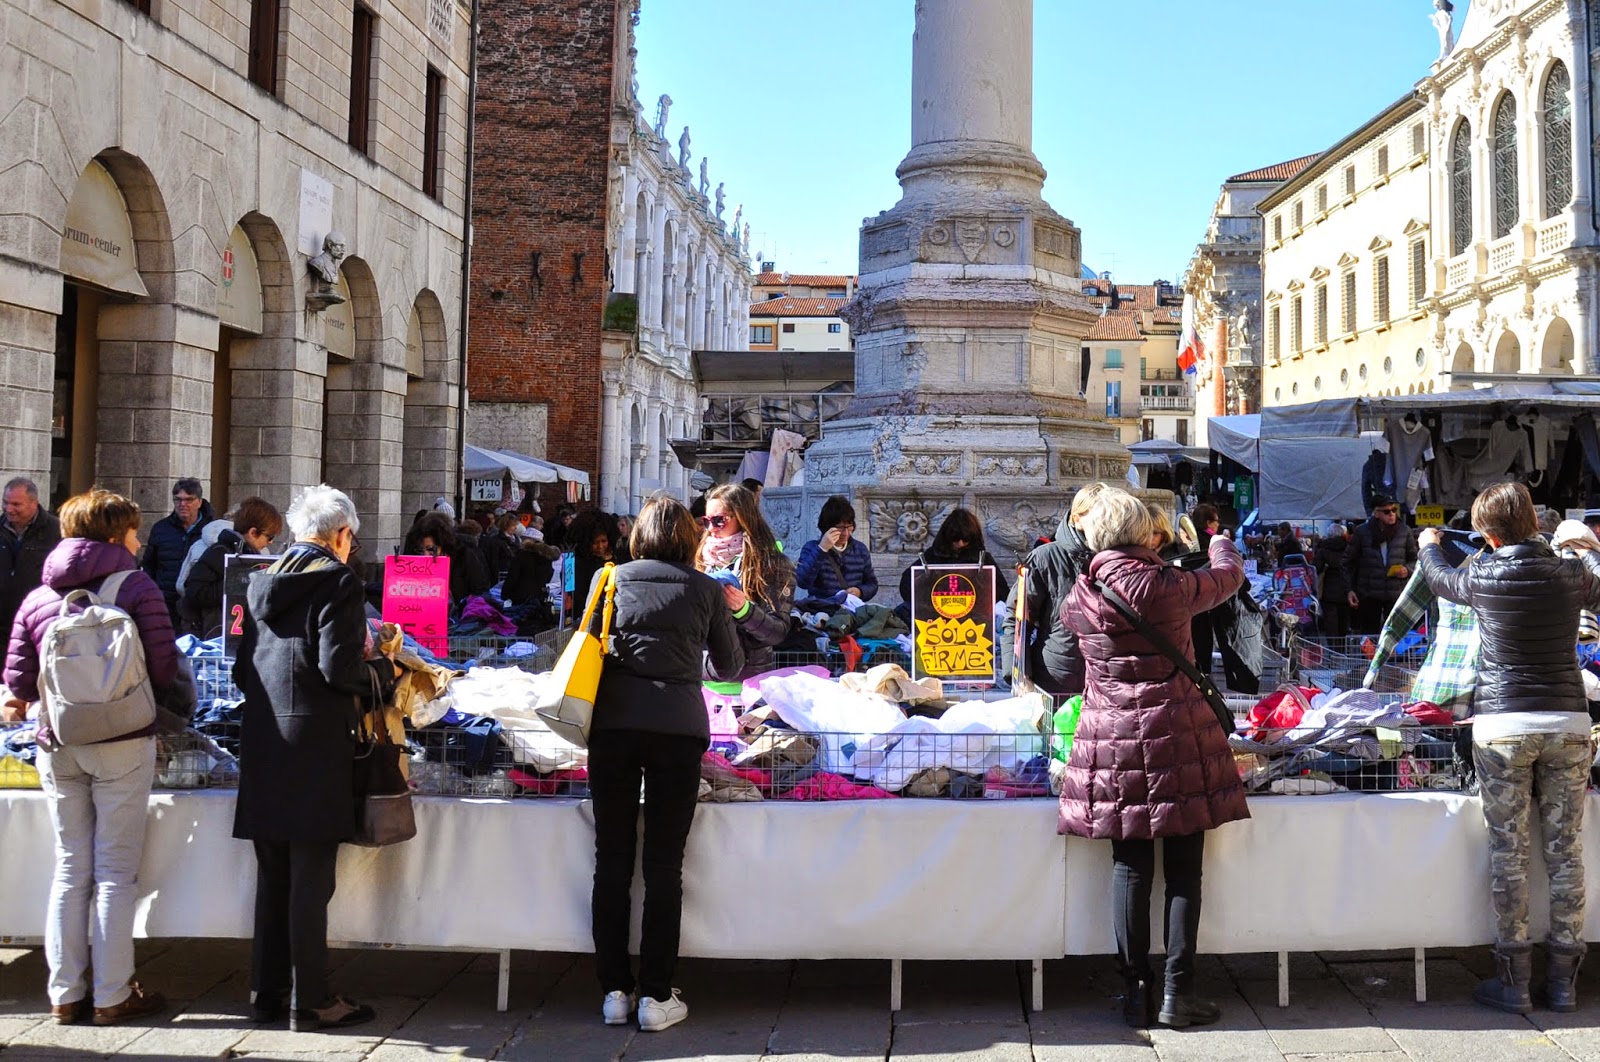 Picking bargains at the Thursday market in Vicenza, Italy